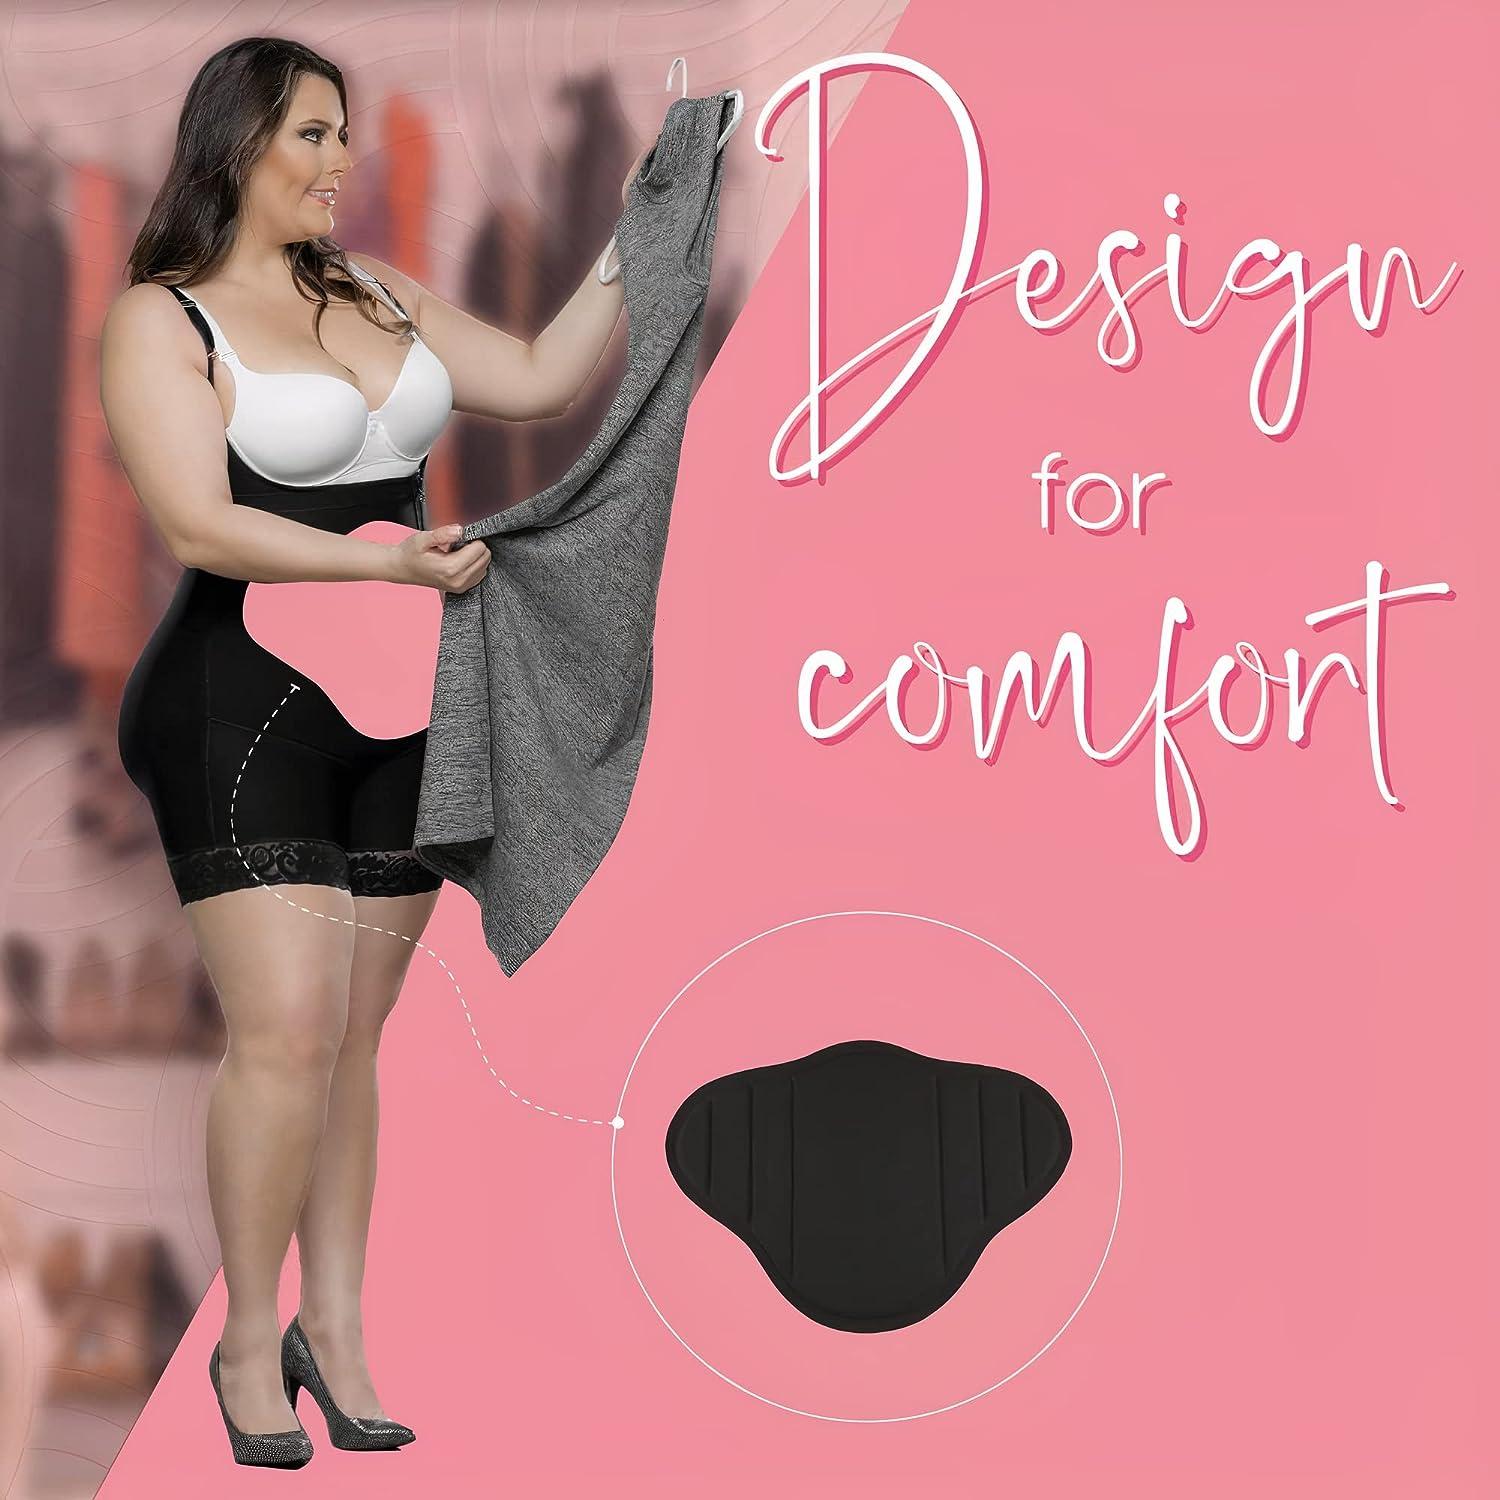 All About Shapewear Lipo board post surgery prevents Inflammation